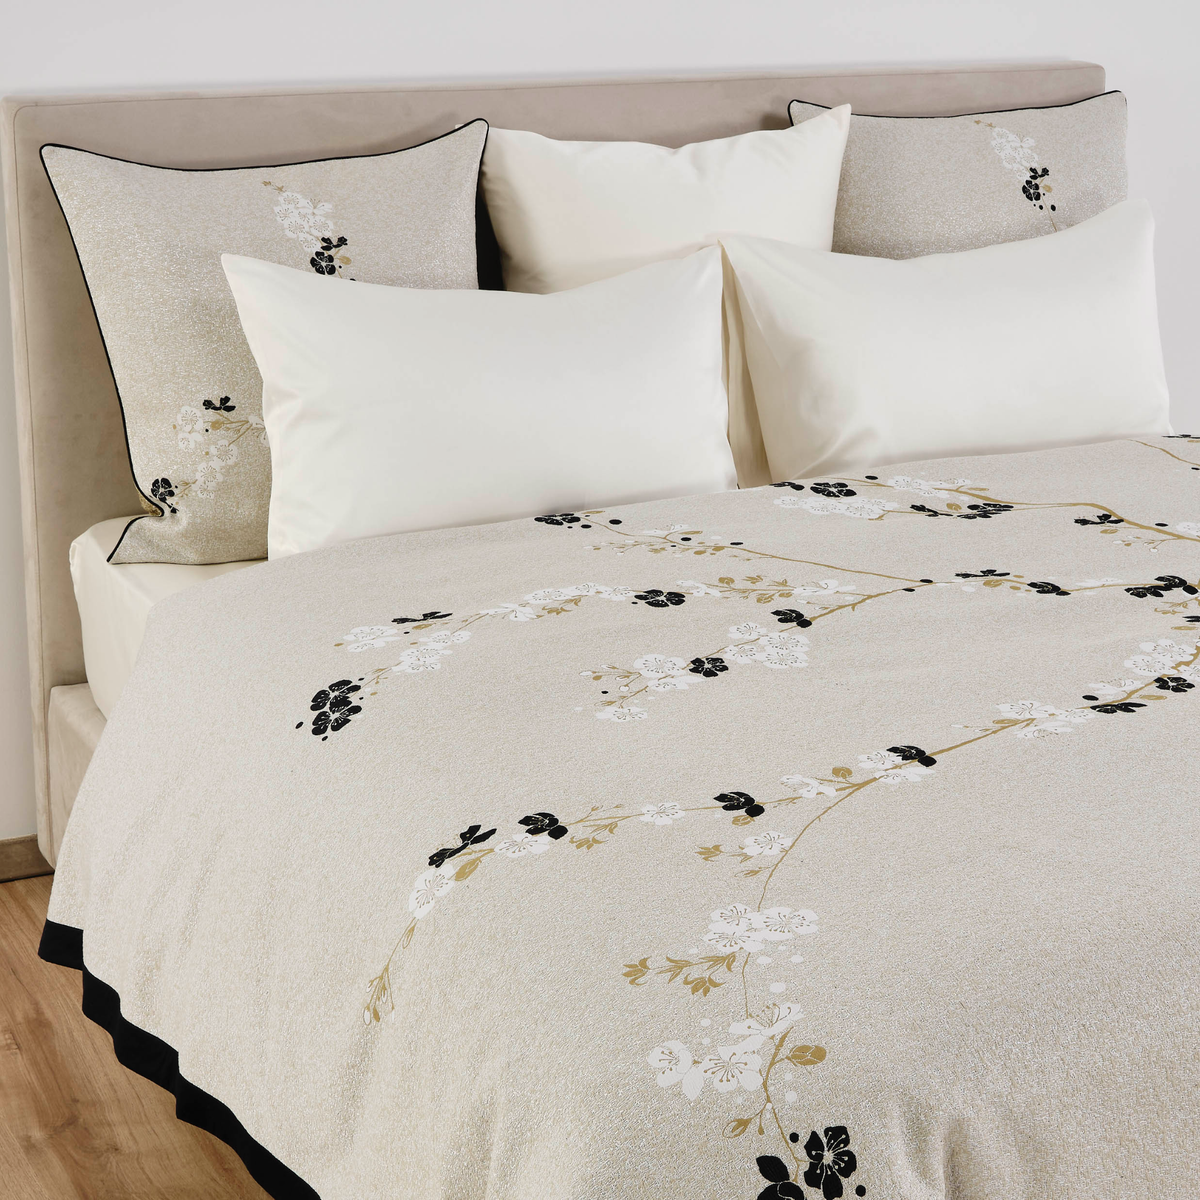 Complimentary Pillowcases with Celso de Lemos Cerisier Collection in Noir Color